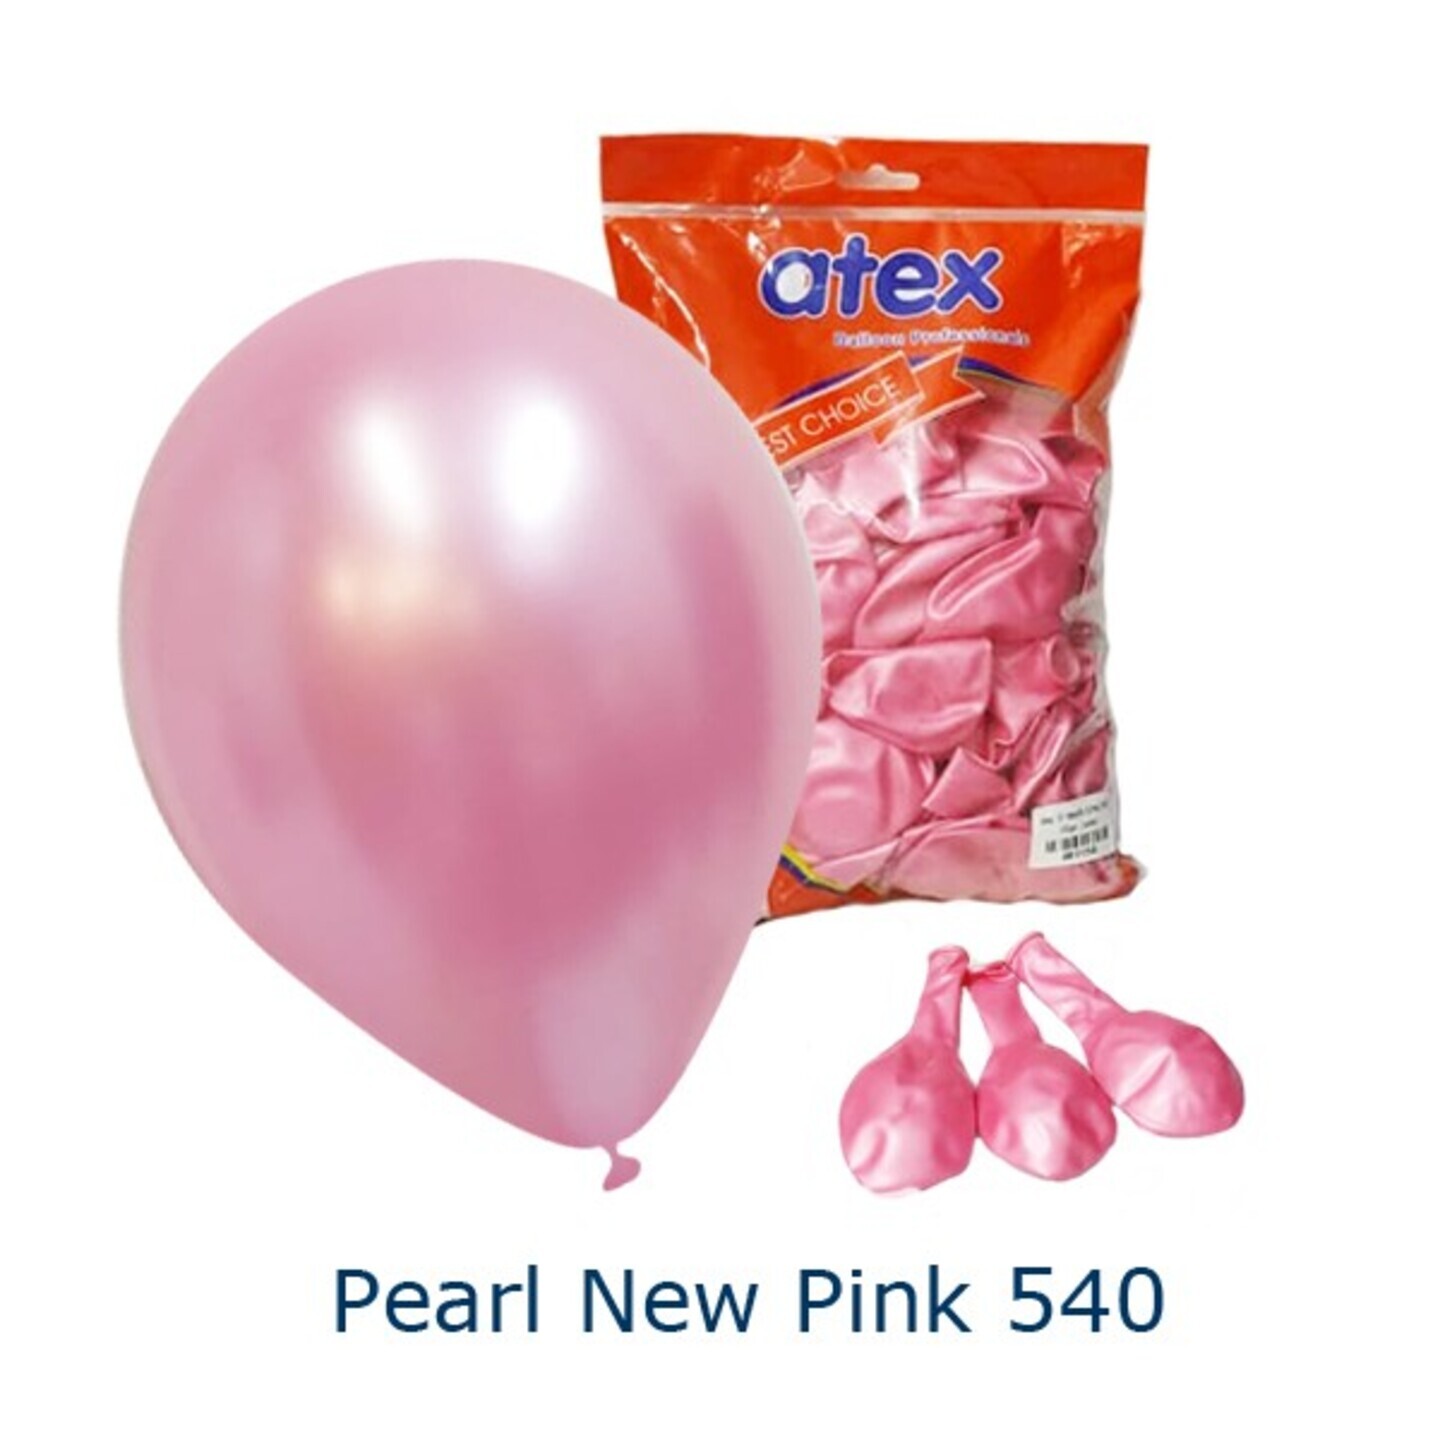 Pearl New Pink 540